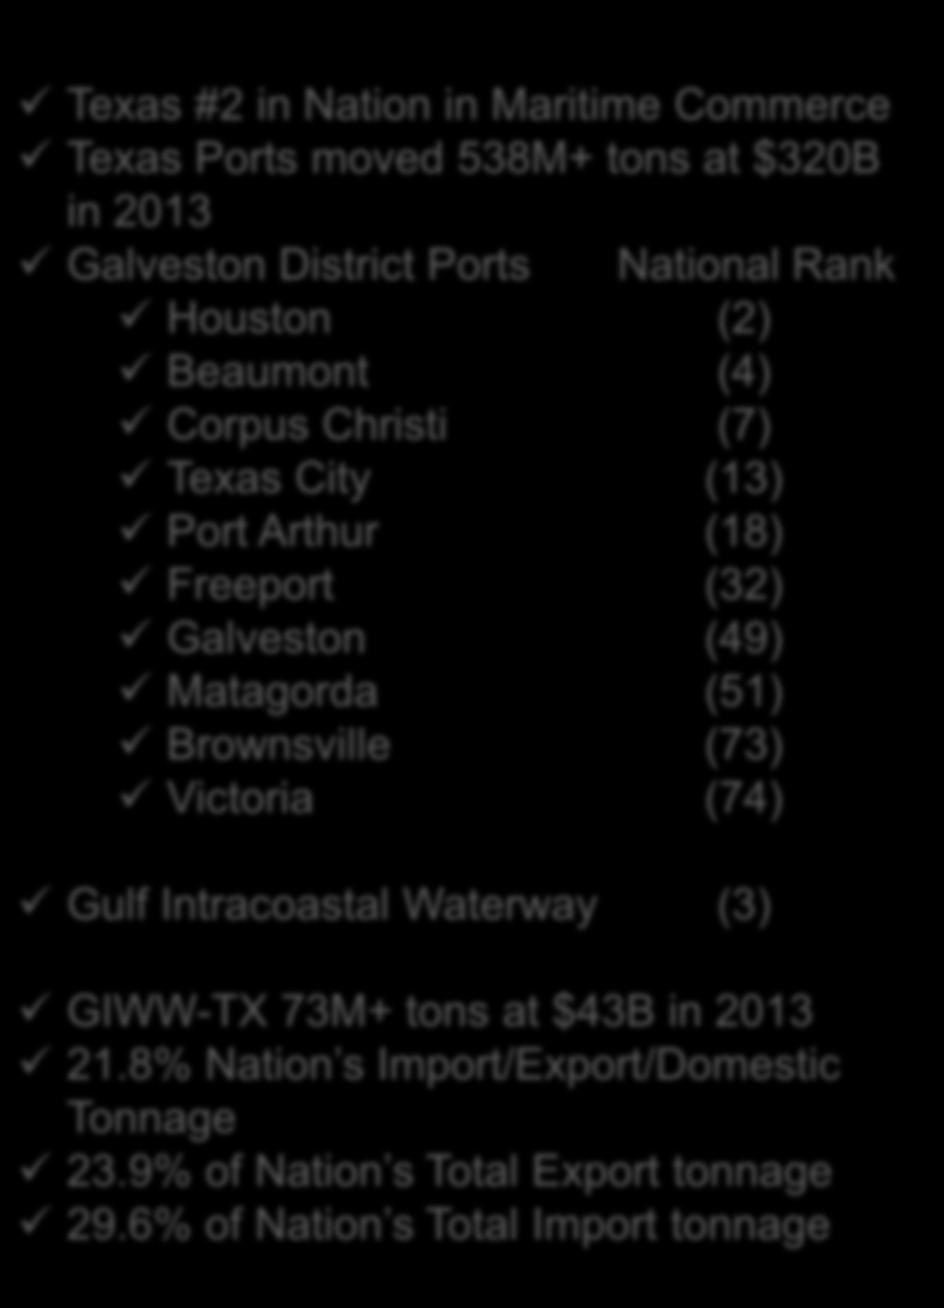 Waterway (3) GIWW-TX 73M+ tons at $43B in 2013 21.8% Nation s Import/Export/Domestic Tonnage US 23.